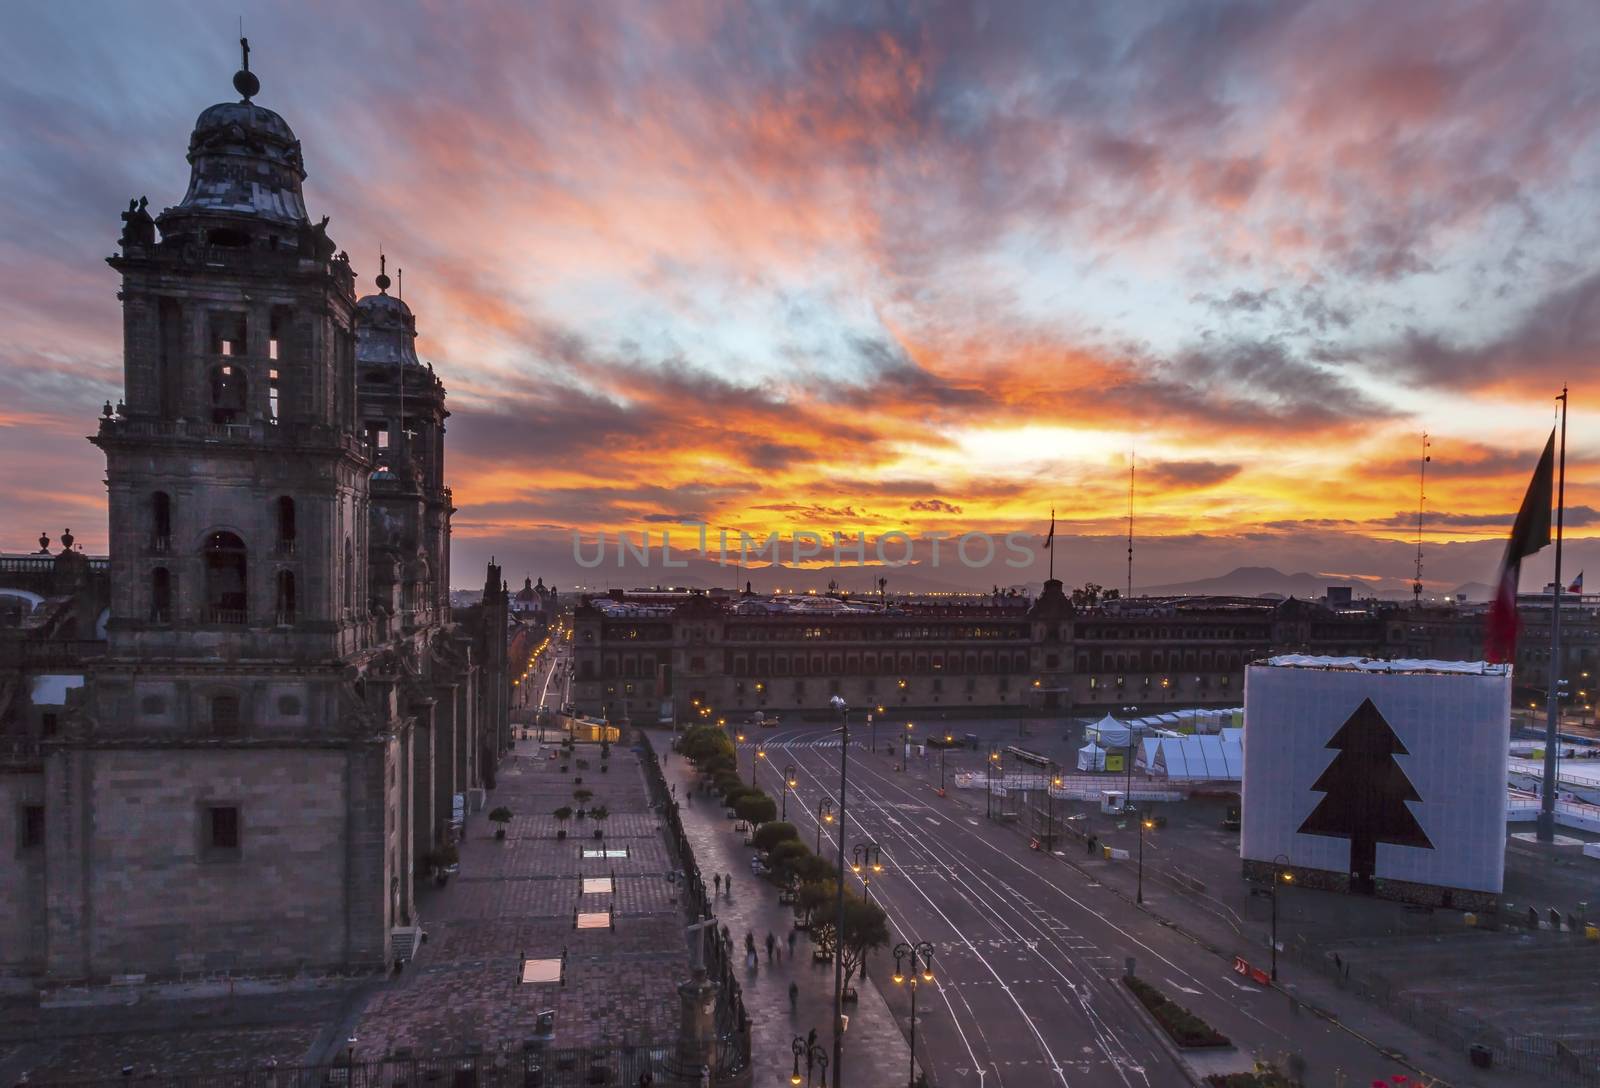 Metropolitan Cathedral Zocalo Mexico City Mexico Sunrise by bill_perry